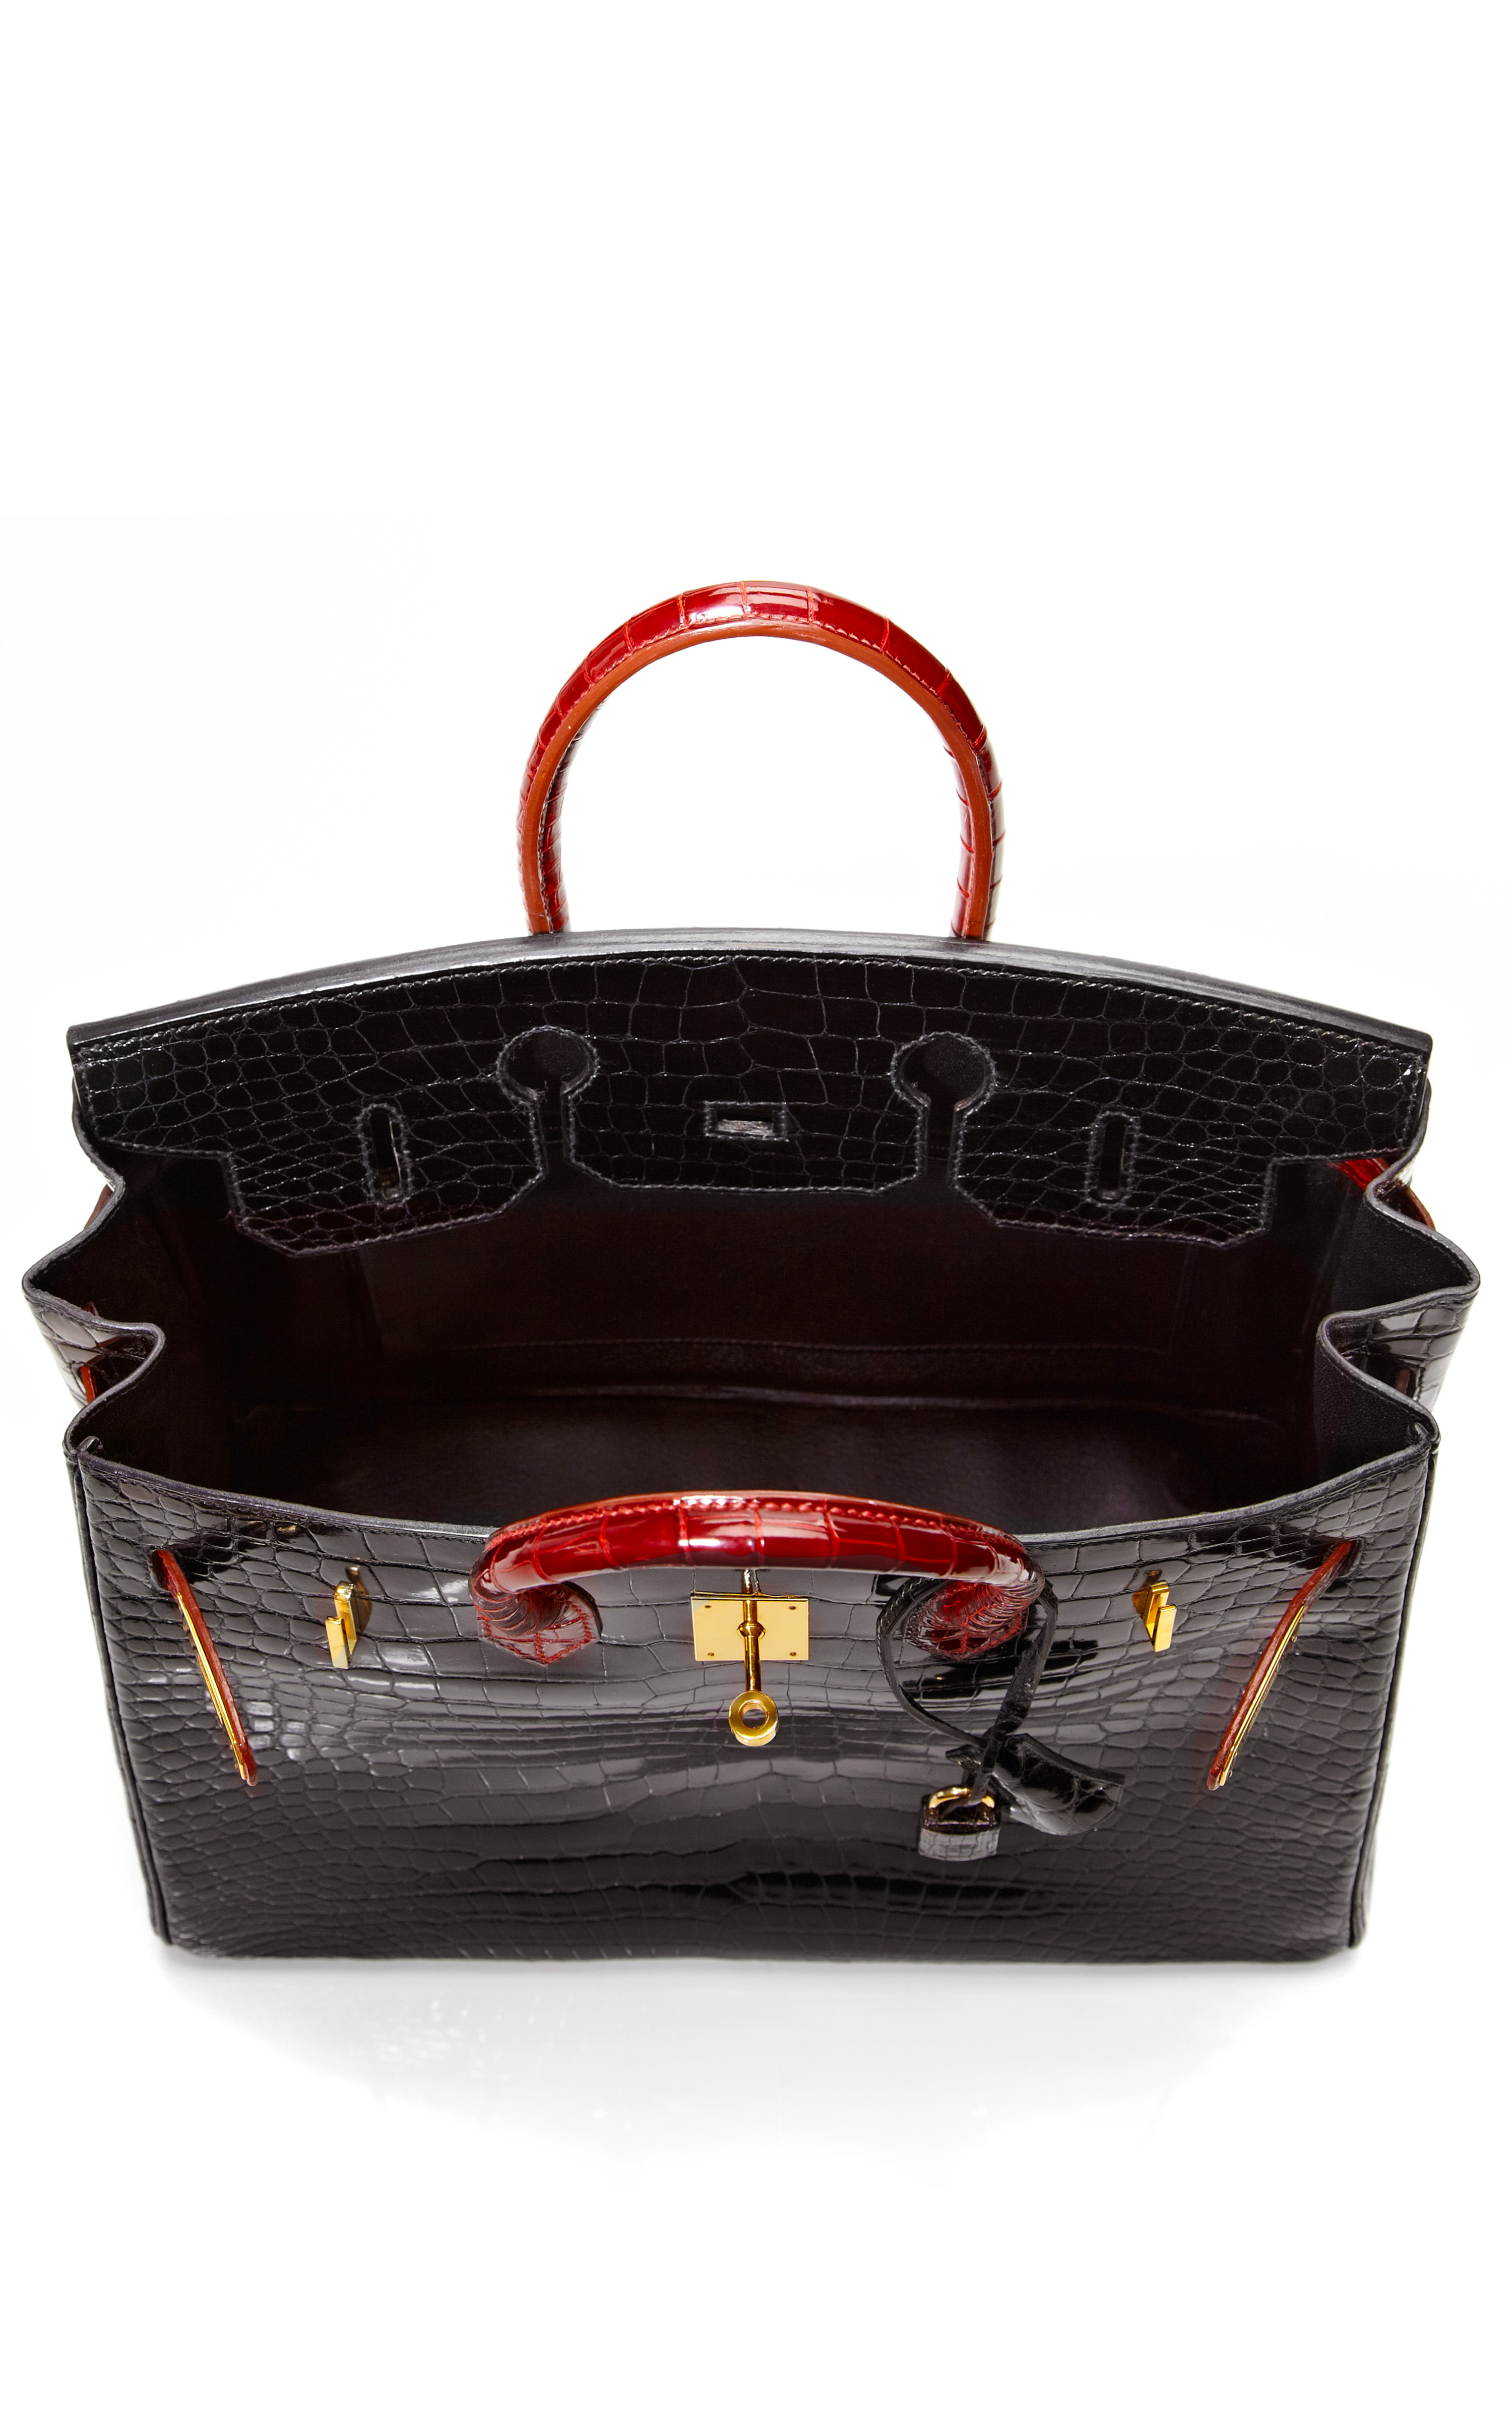 Heritage auctions special collection Hermes 35cm Shiny Black Rouge ...